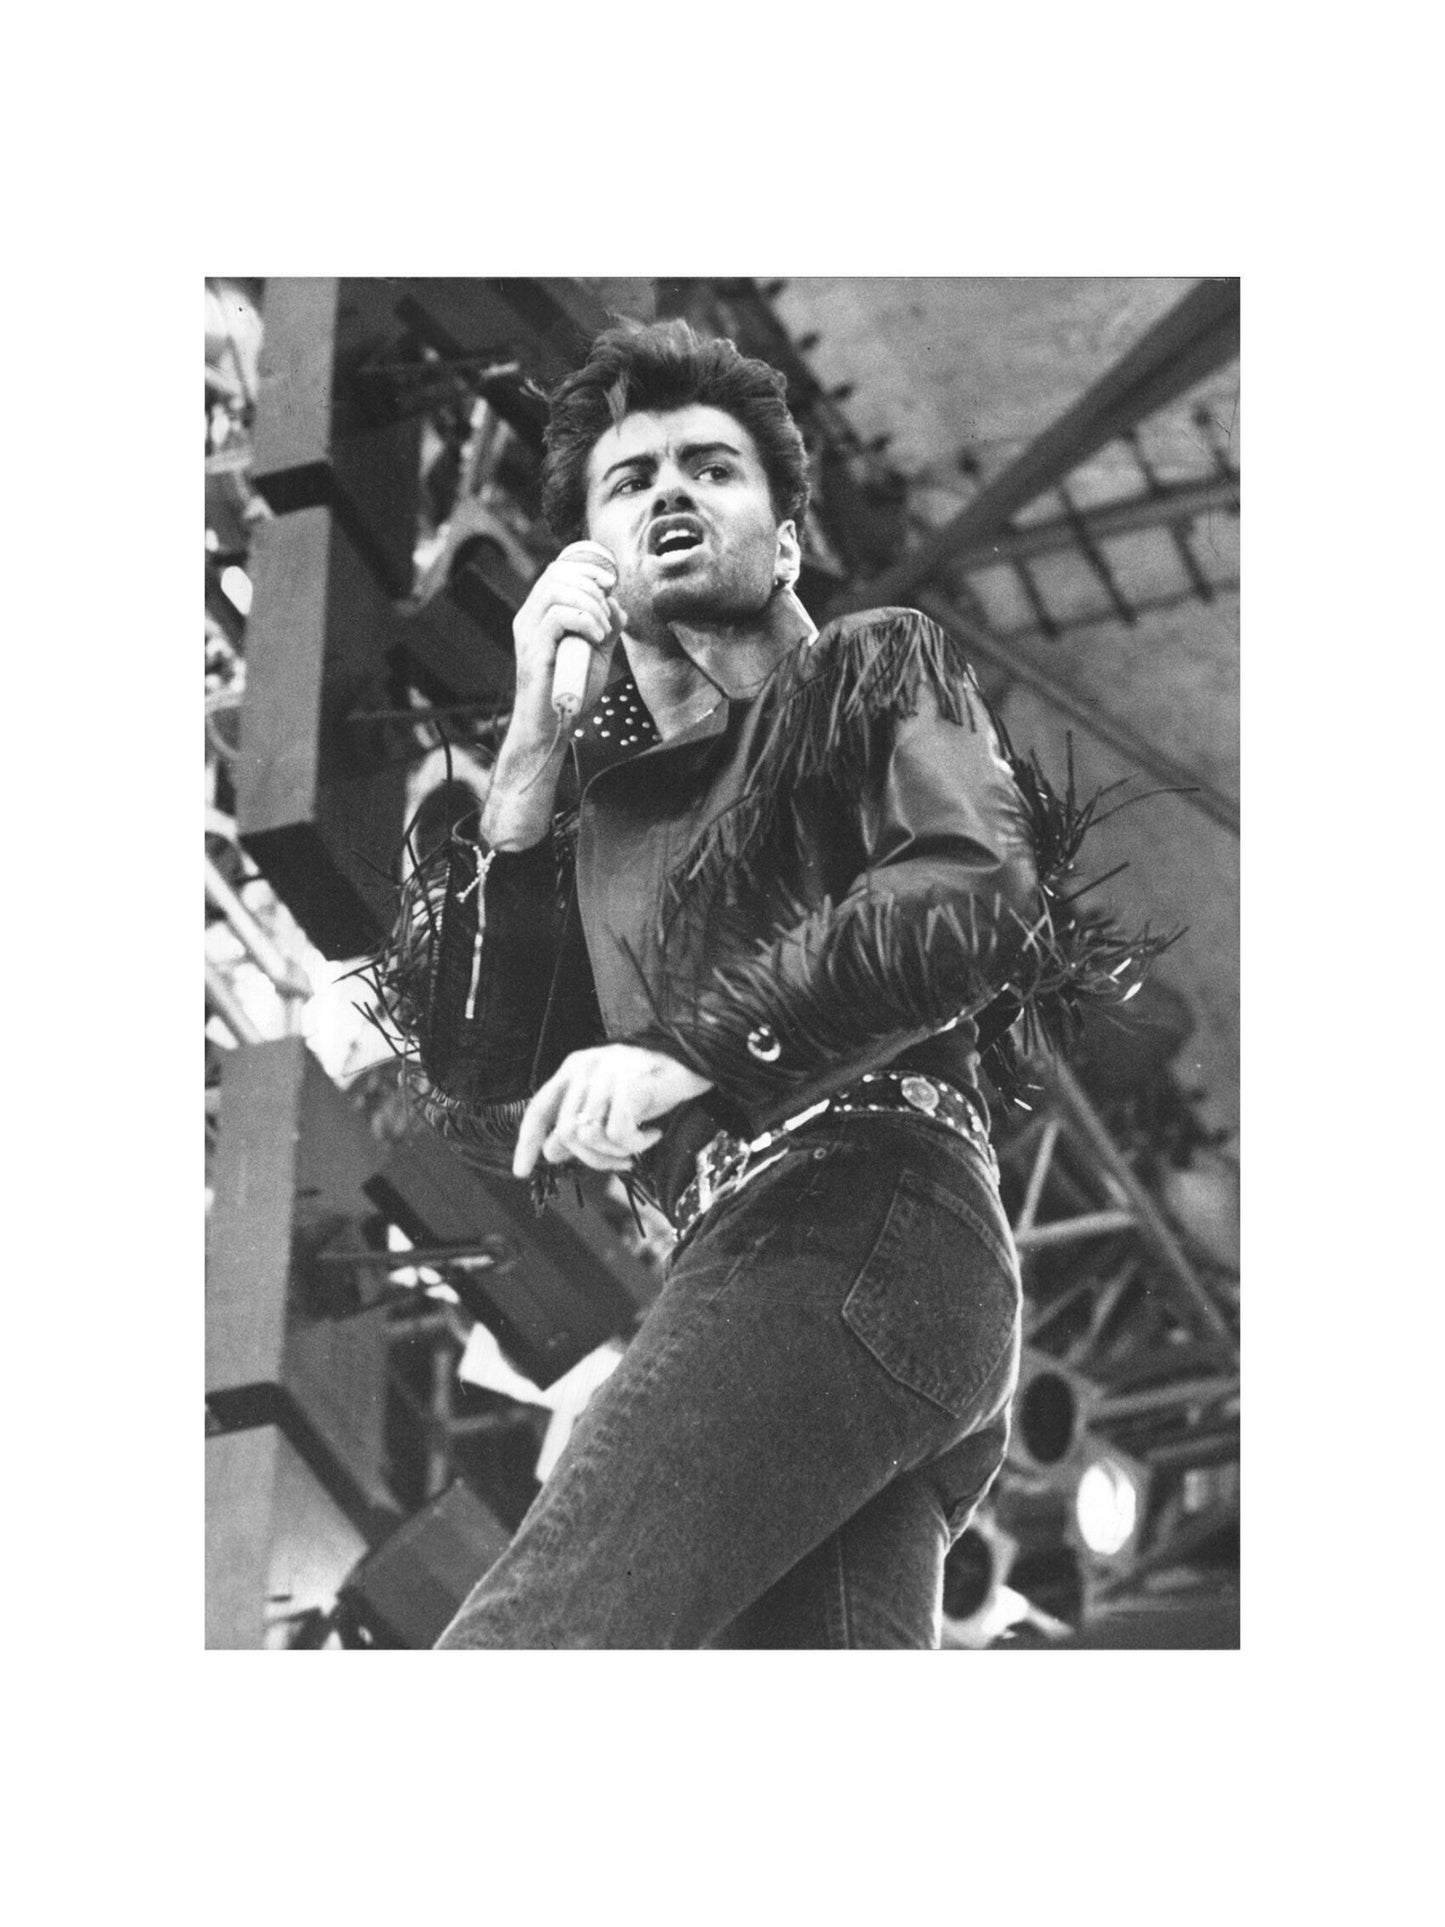 Wham! - George Michael Singing At Their Last Concert, England, 1986 Print 2